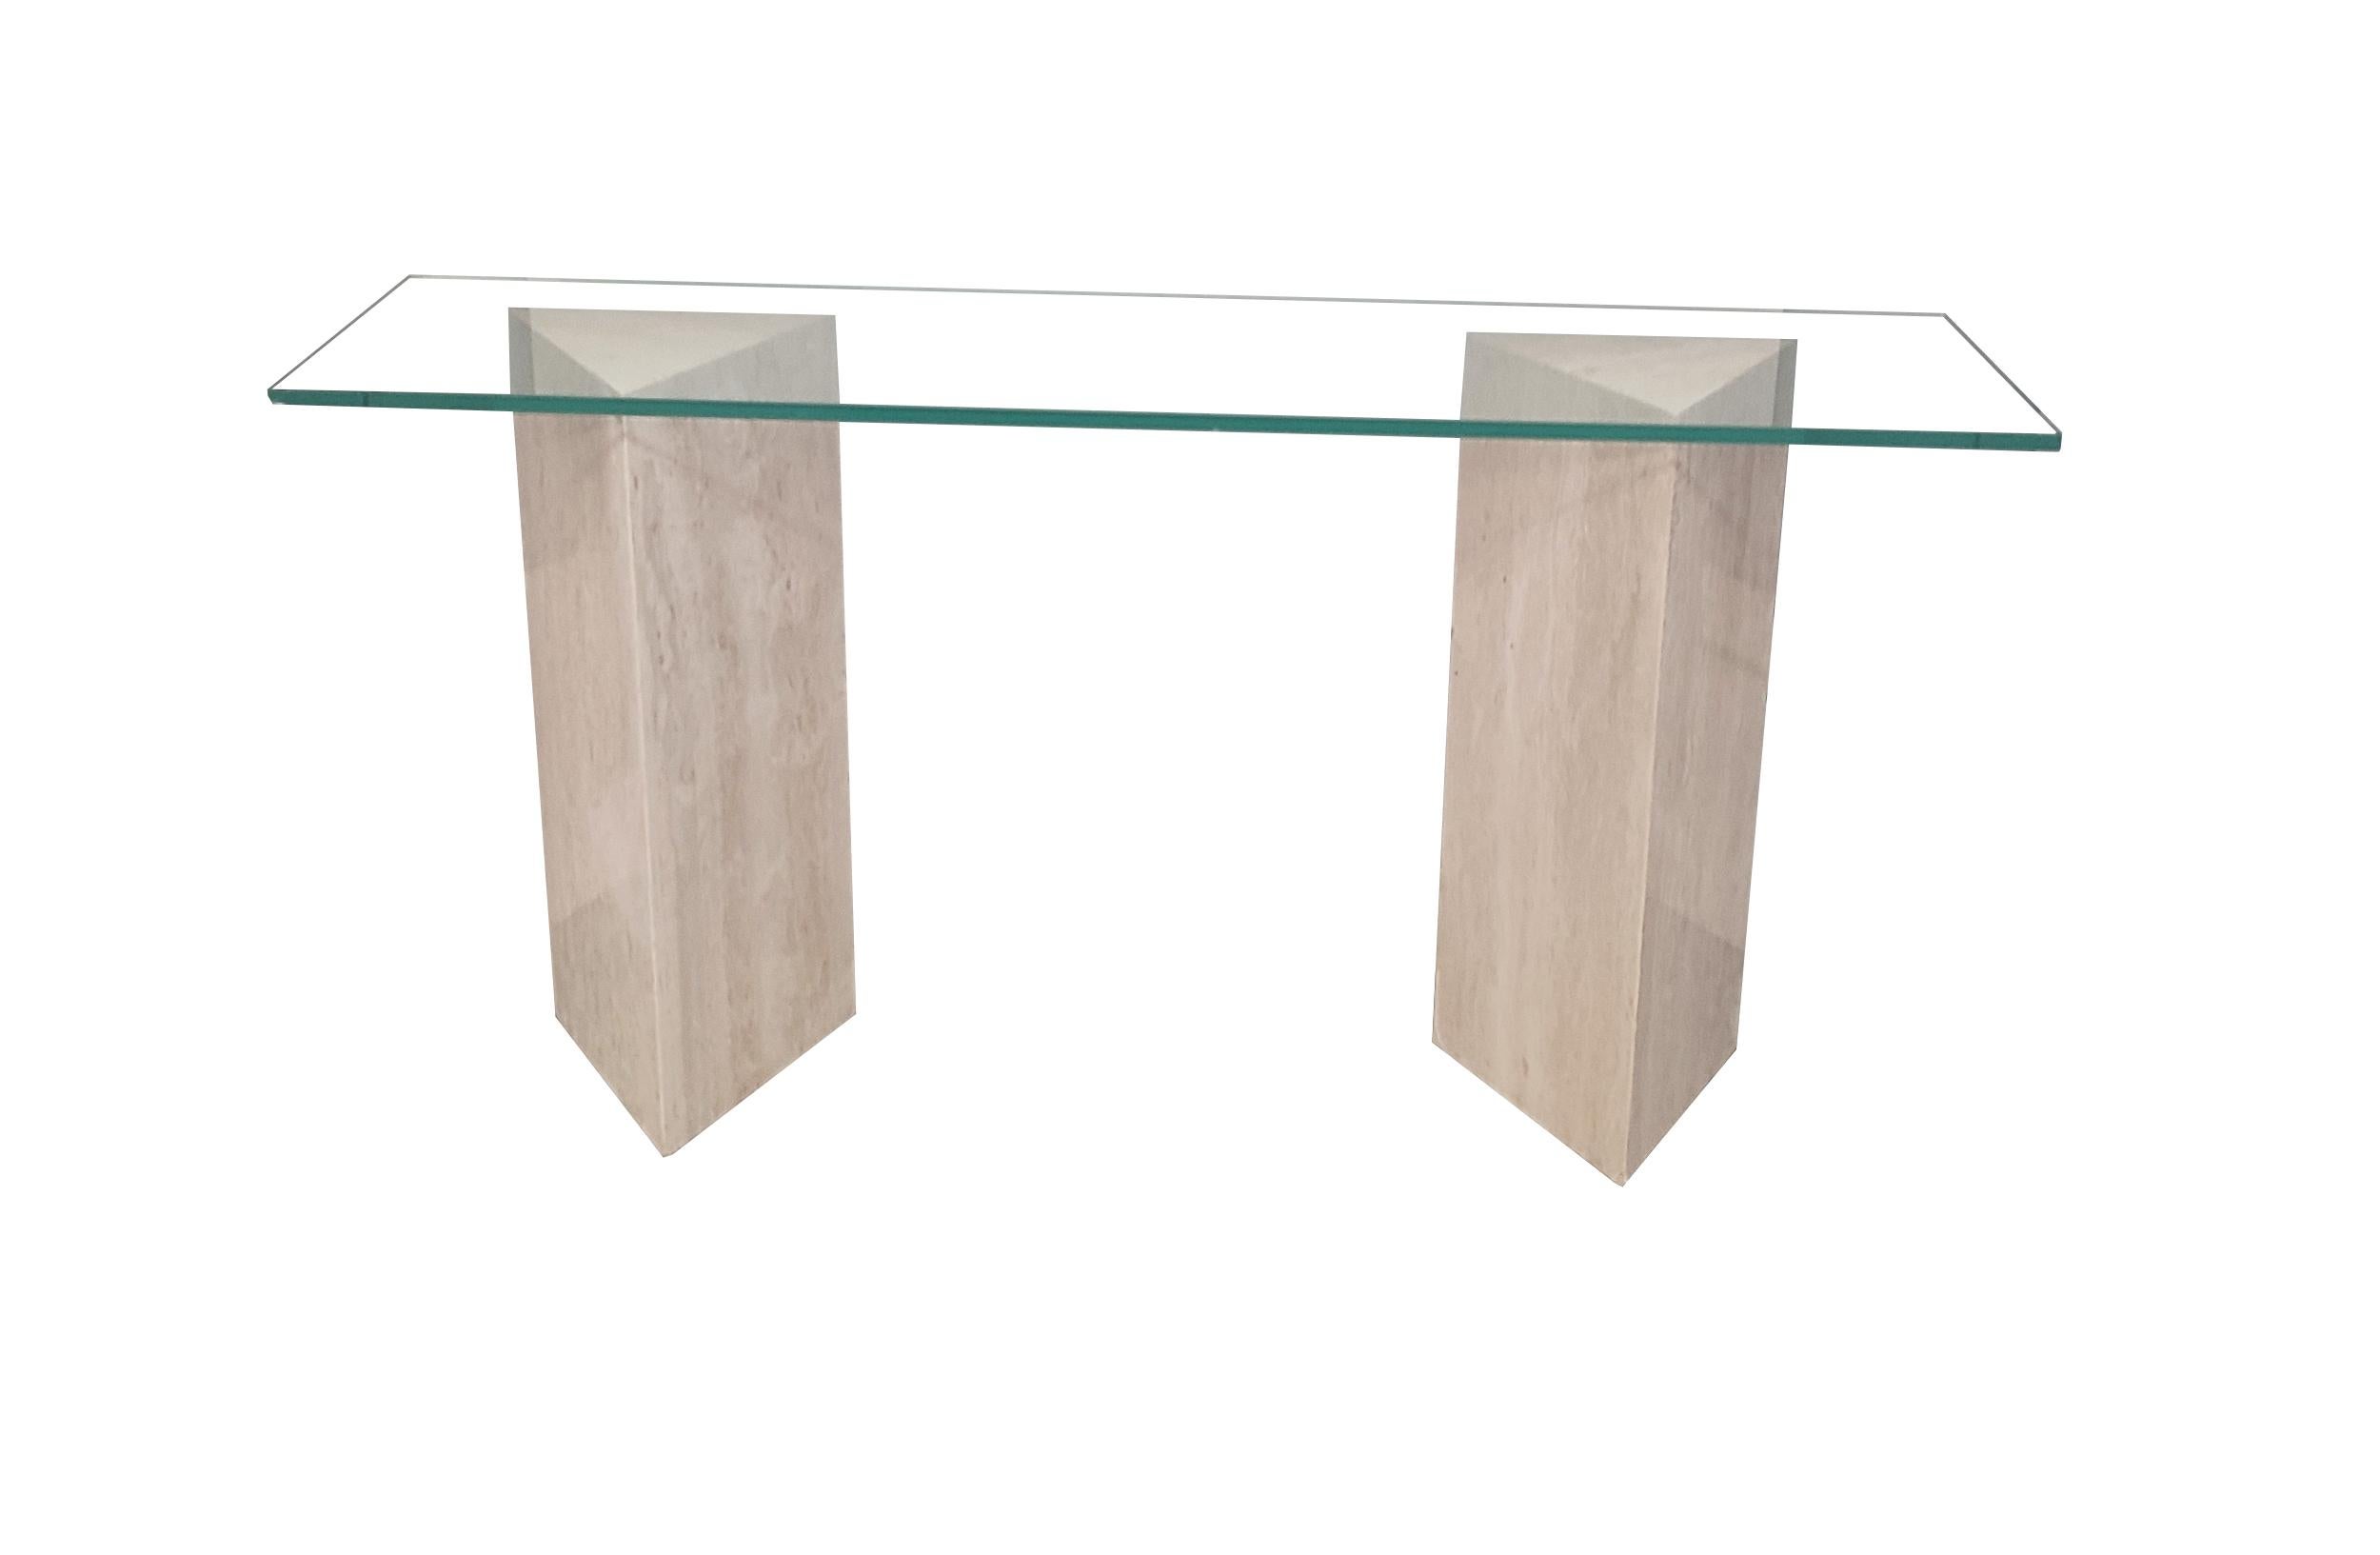 Late 20th Century Tria Console Table Travertine Marble MidCentury '99 Modern Design Spain In Stock For Sale